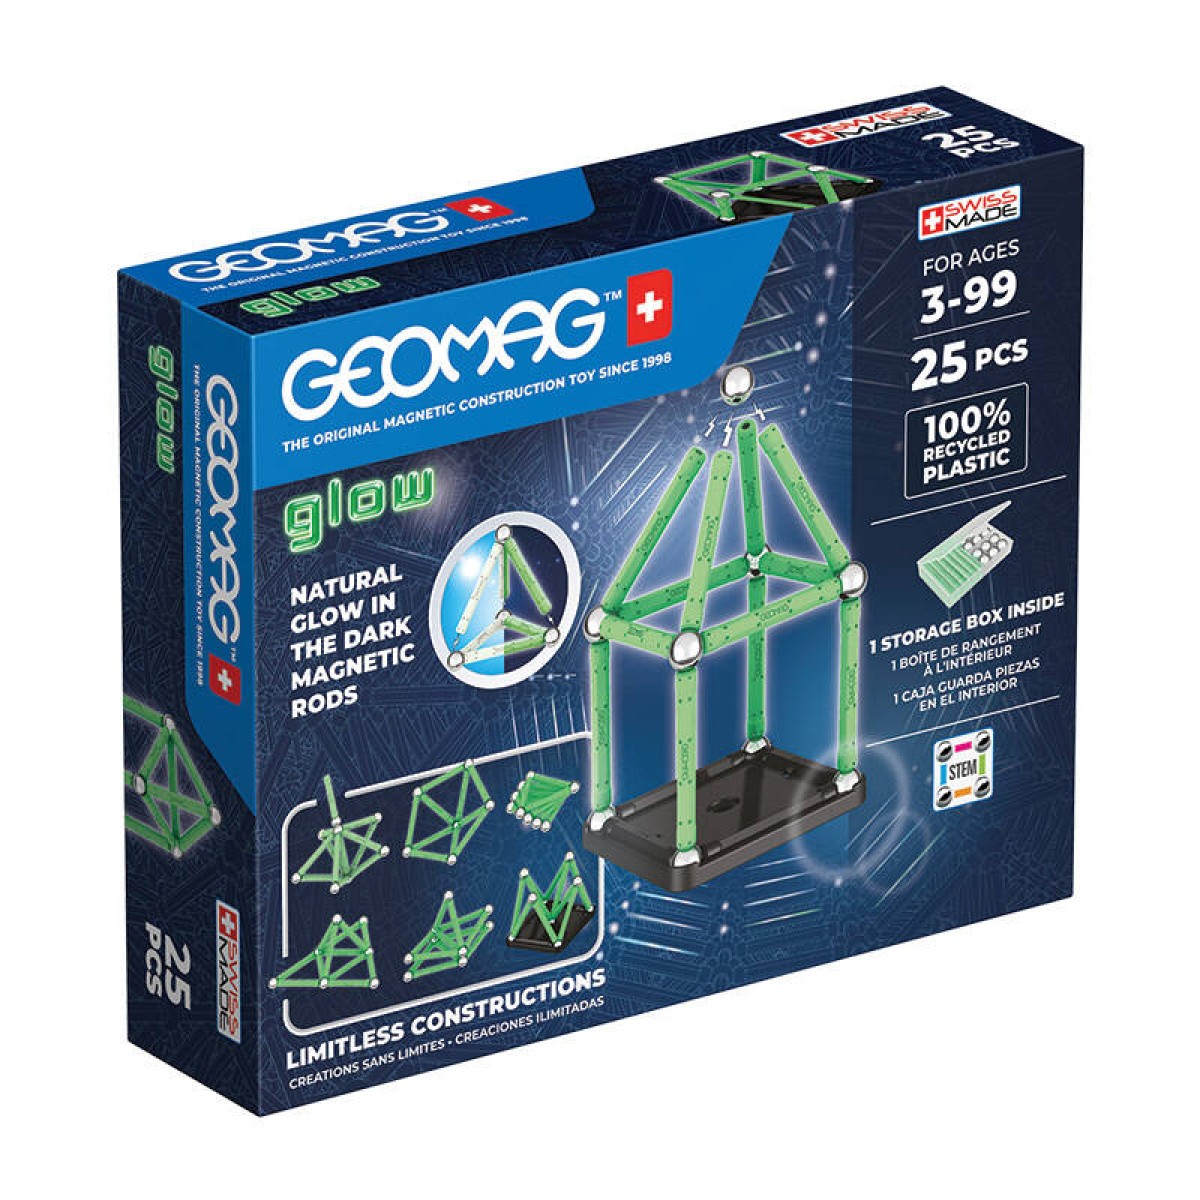 Glow Recycled Magnetic Blocks 25 pieces GEOMAG GEO-328